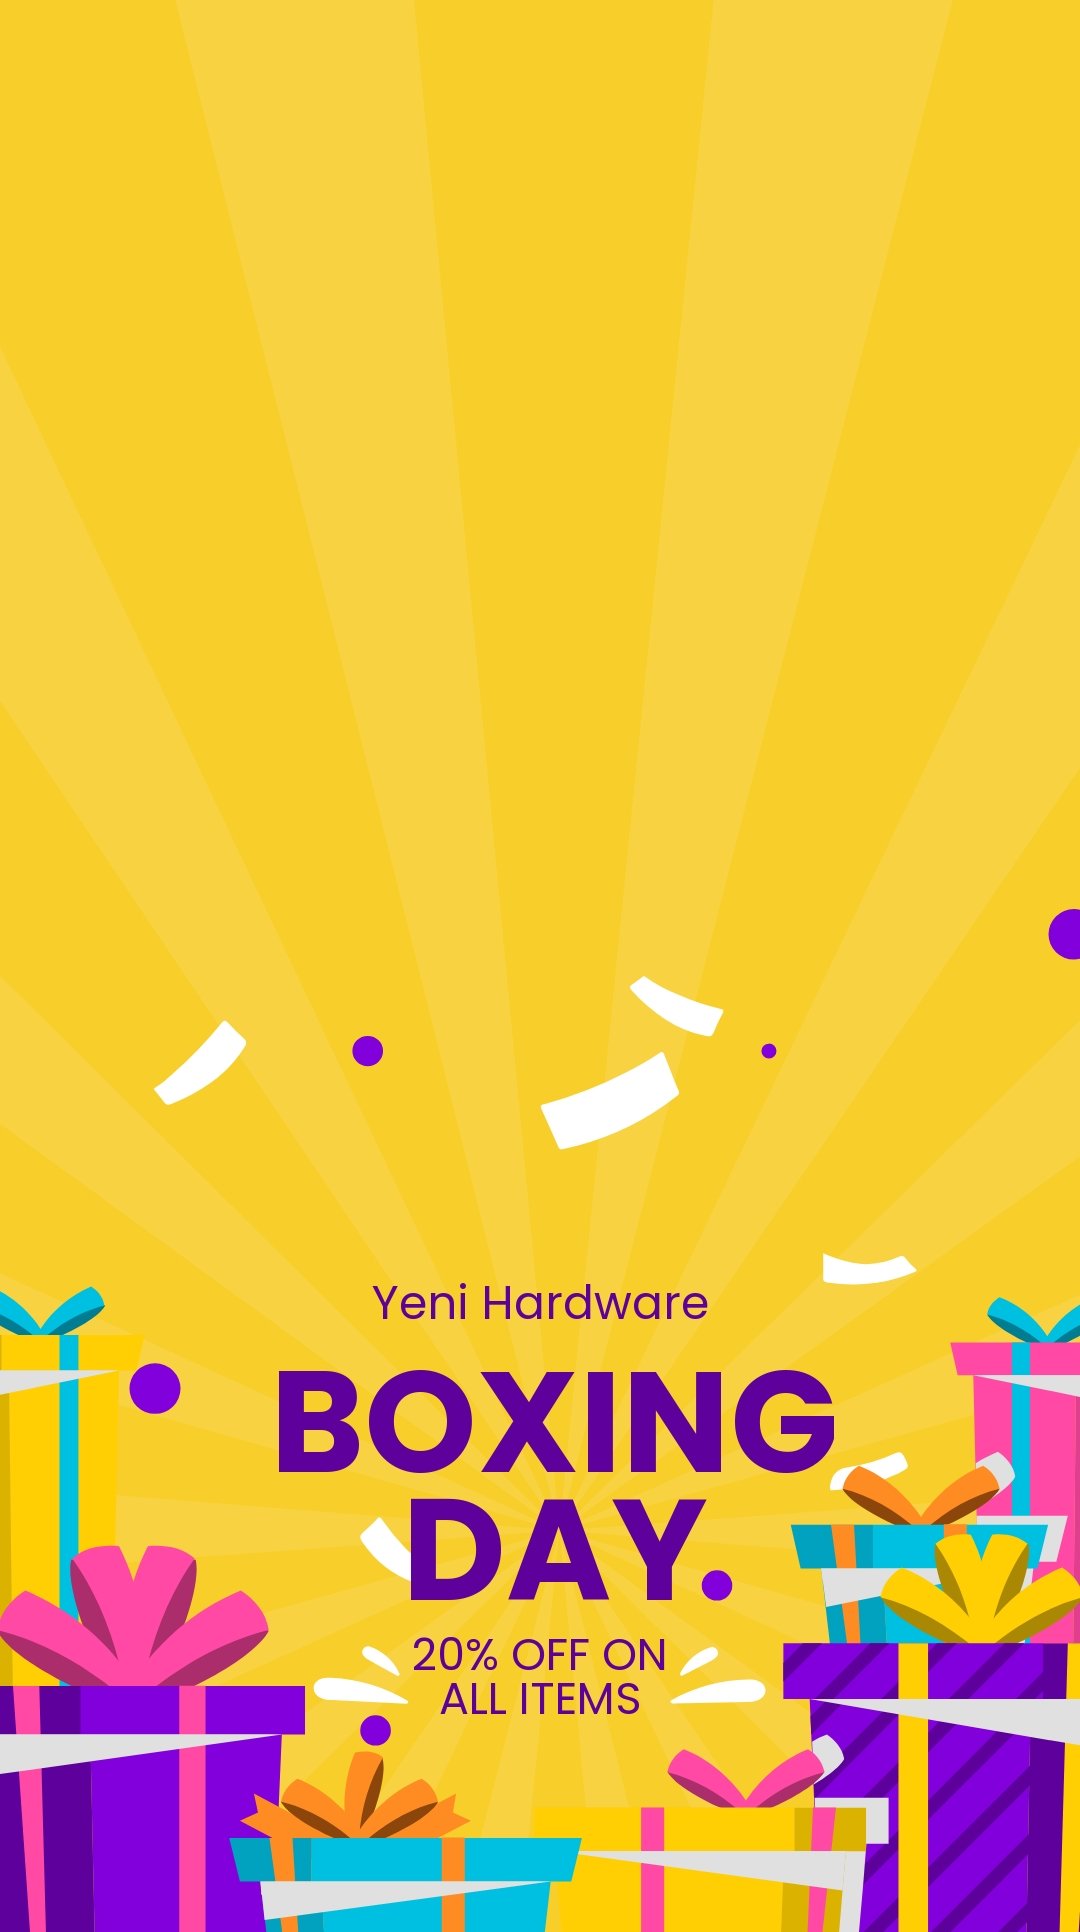 Boxing Day Promotion Snapchat Geofilter Template